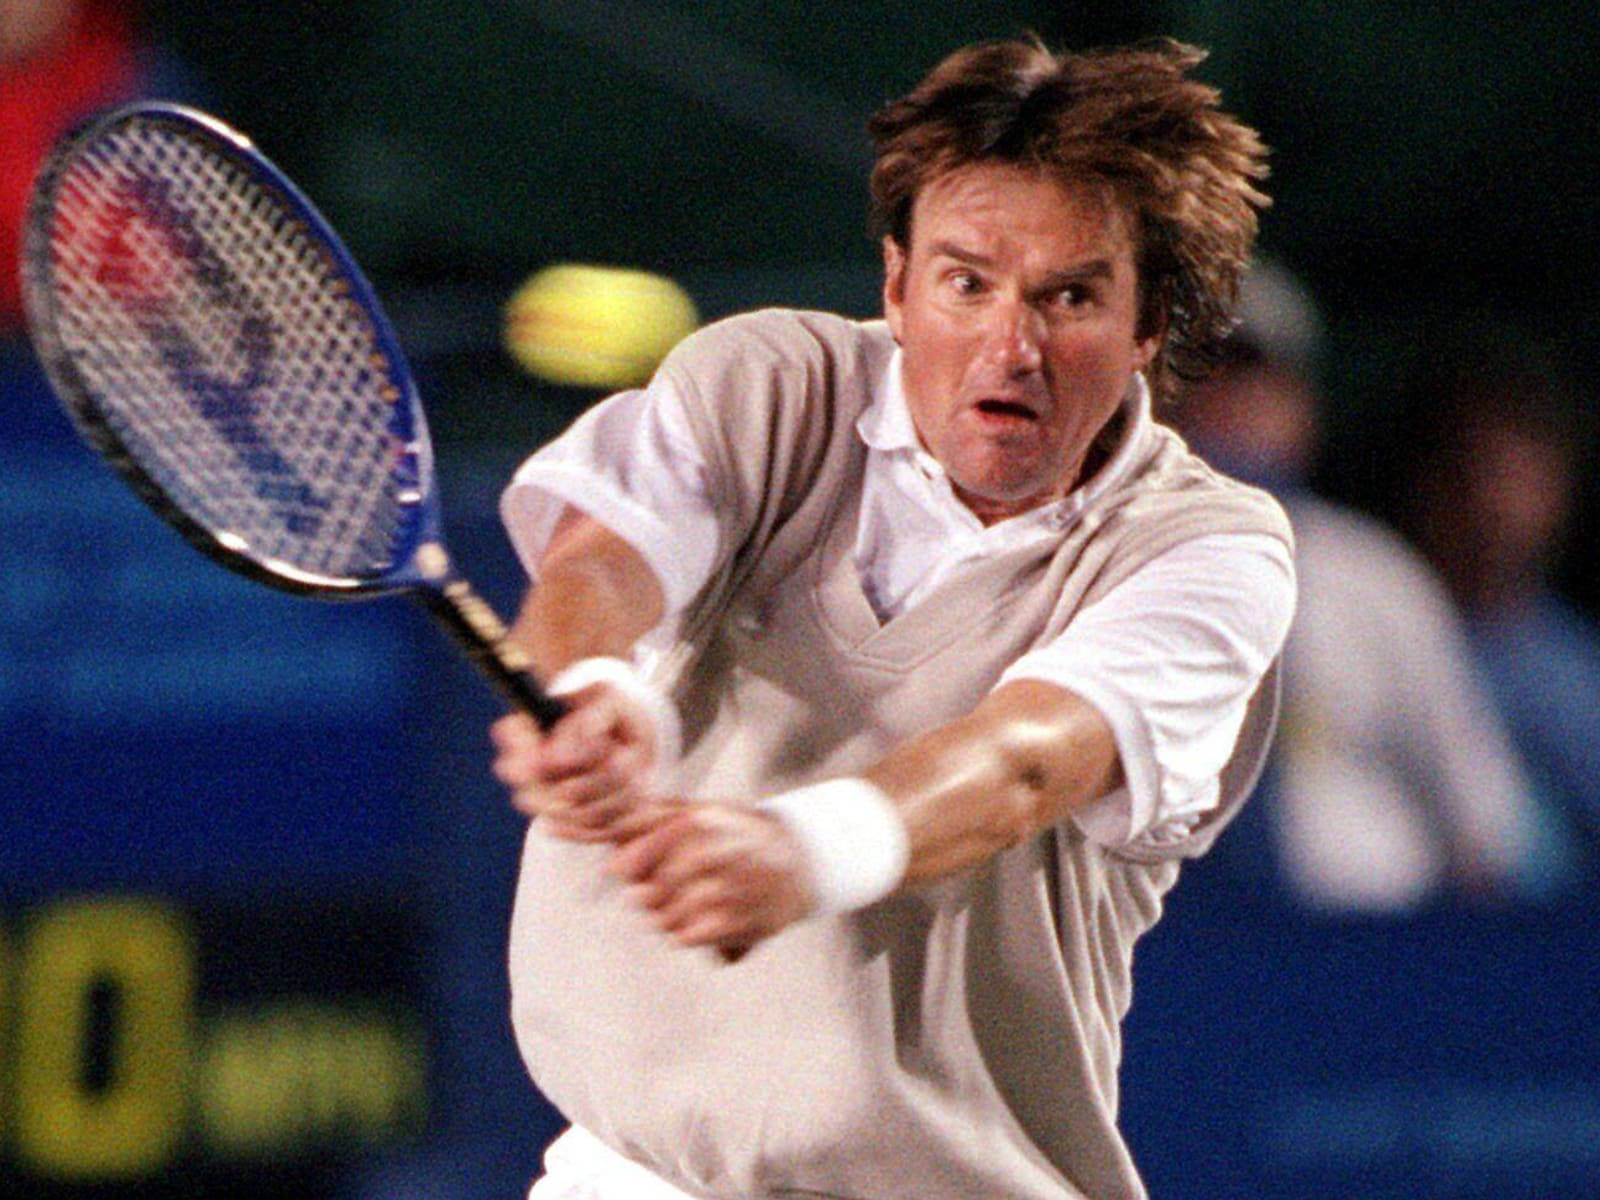 Jimmyconnors Tar Emot Bollen. (this Sentence Doesn't Make Sense As A Computer Or Mobile Wallpaper Description. Can You Provide A Different Sentence For Me To Translate?) Wallpaper